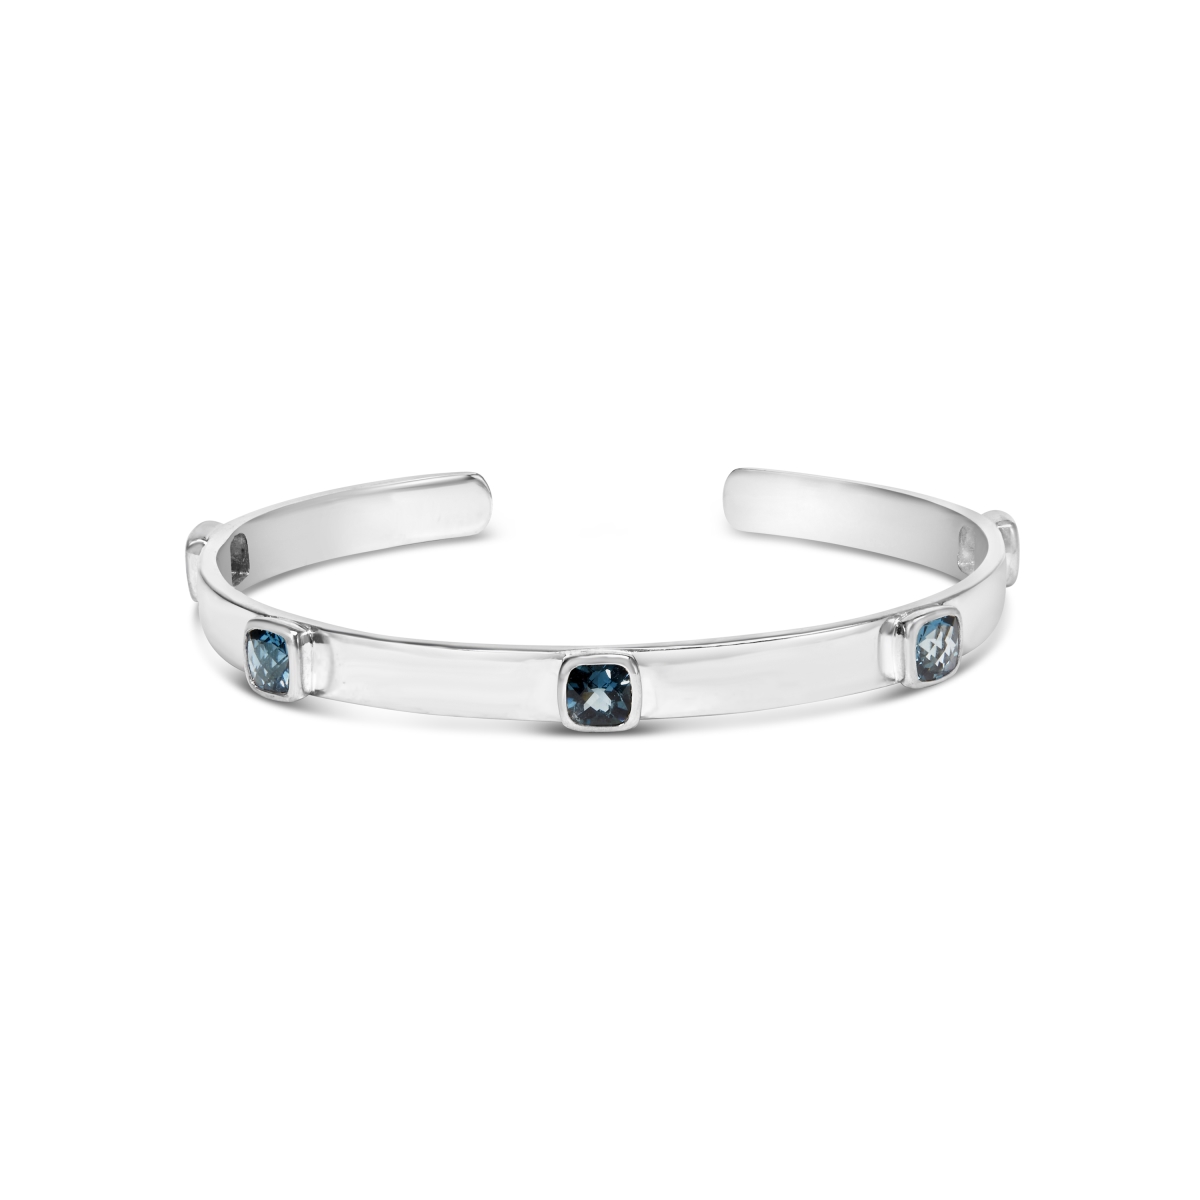 Picture of Infinite Jewels 020370BASH White .925 Sterling Silver & Bezel Set 5 mm Checkerboard Cushion Cut Blue Topaz Bangle - Fits Wrists up to 8 in.